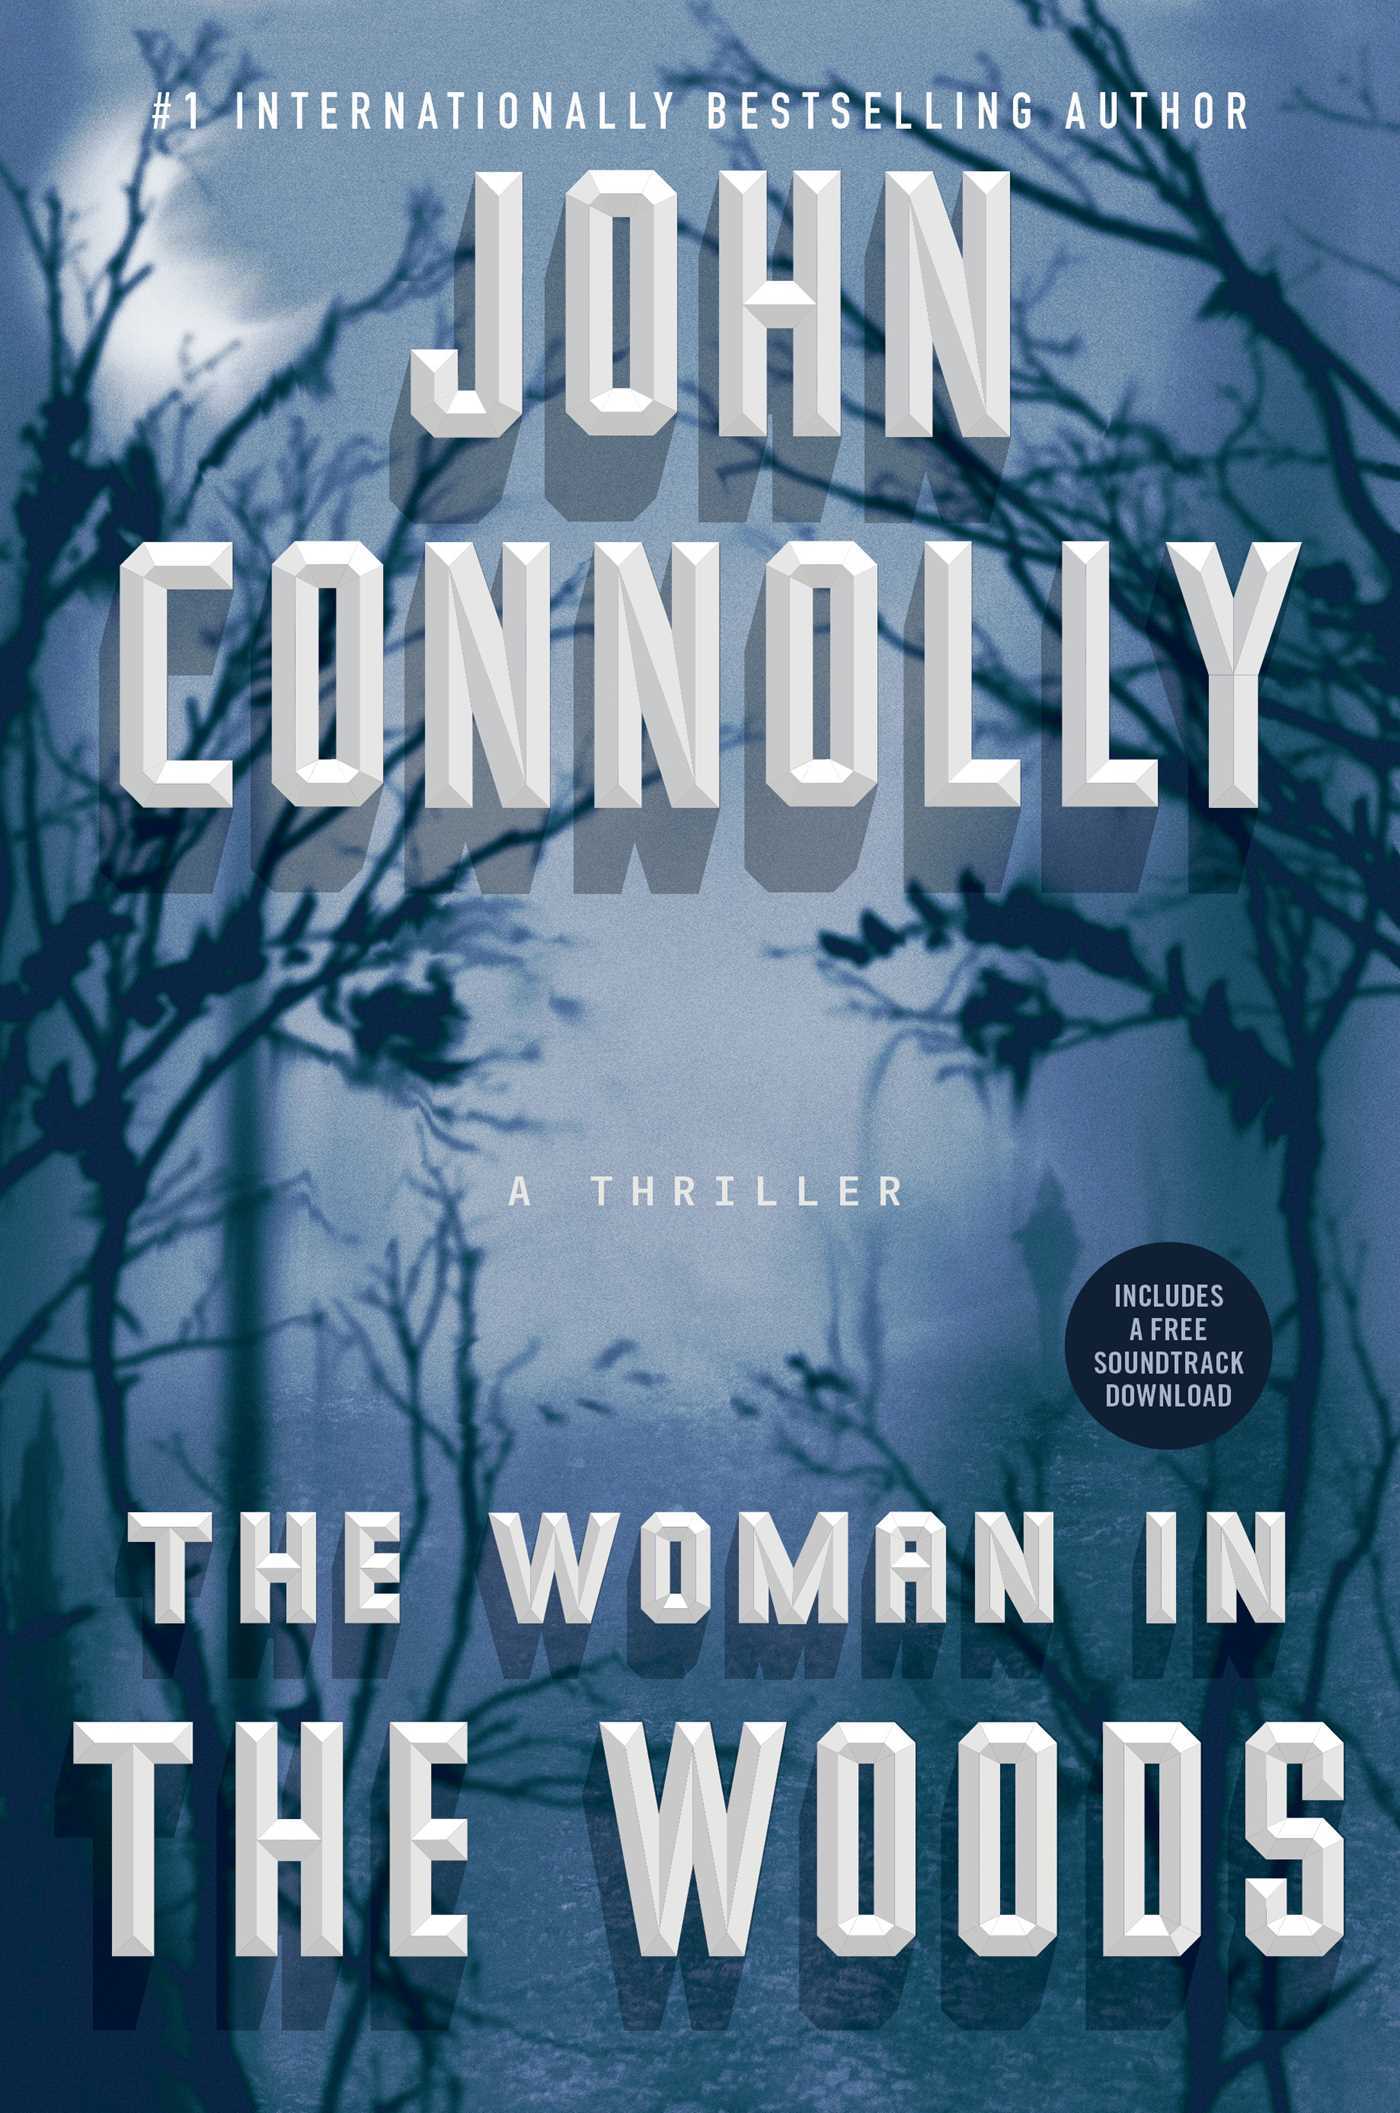 6. The Woman in the Woods (Charlie Parker) by John Connolly